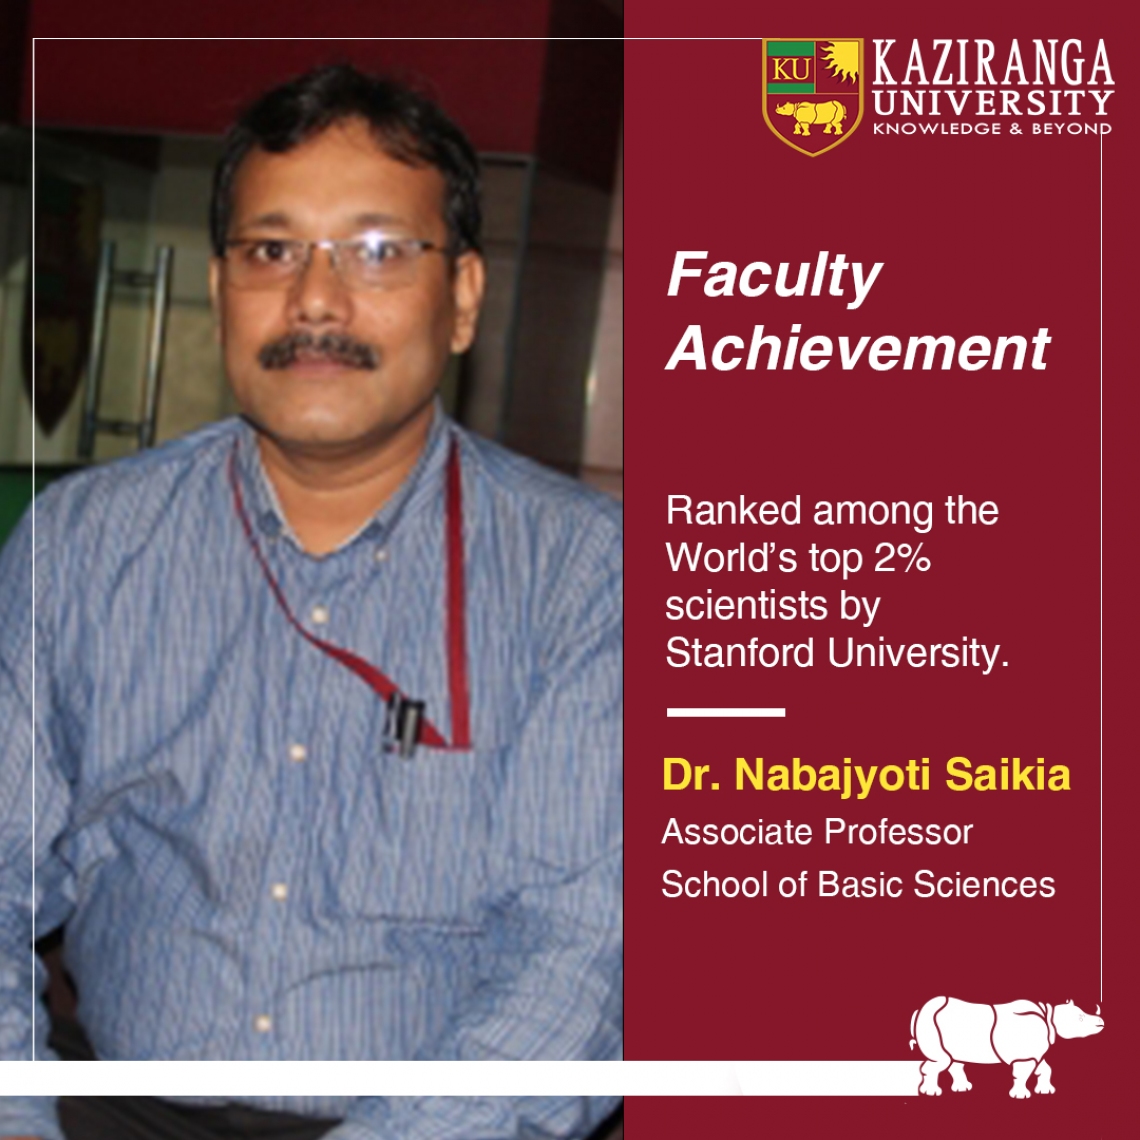 Dr Nabajyoti Saikia ranked among World's top 2% scientists by Standford University